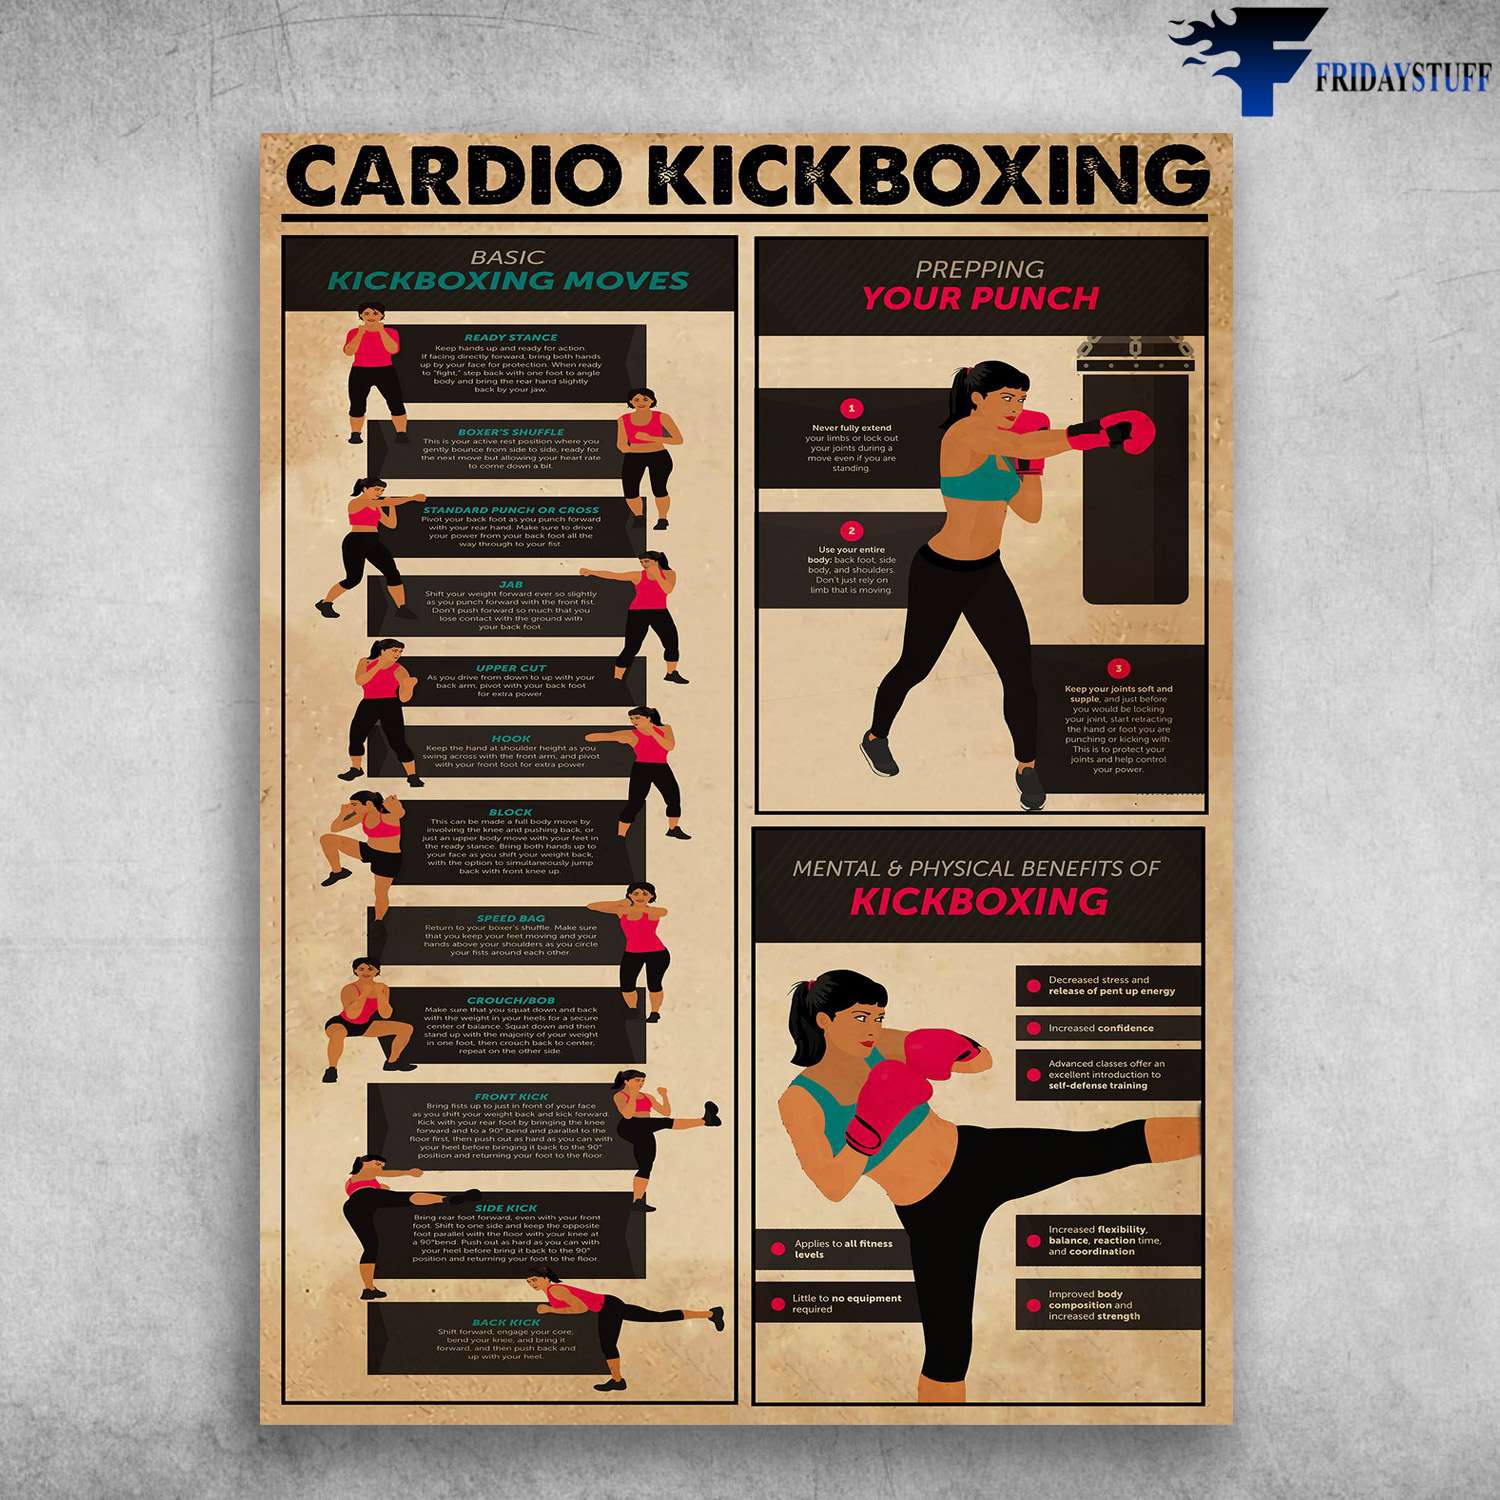 Cardio Kickboxing - Basic Kickboxing Moves, Prepping Your Punch, Mental And Physical Benefits Of Kickboxing